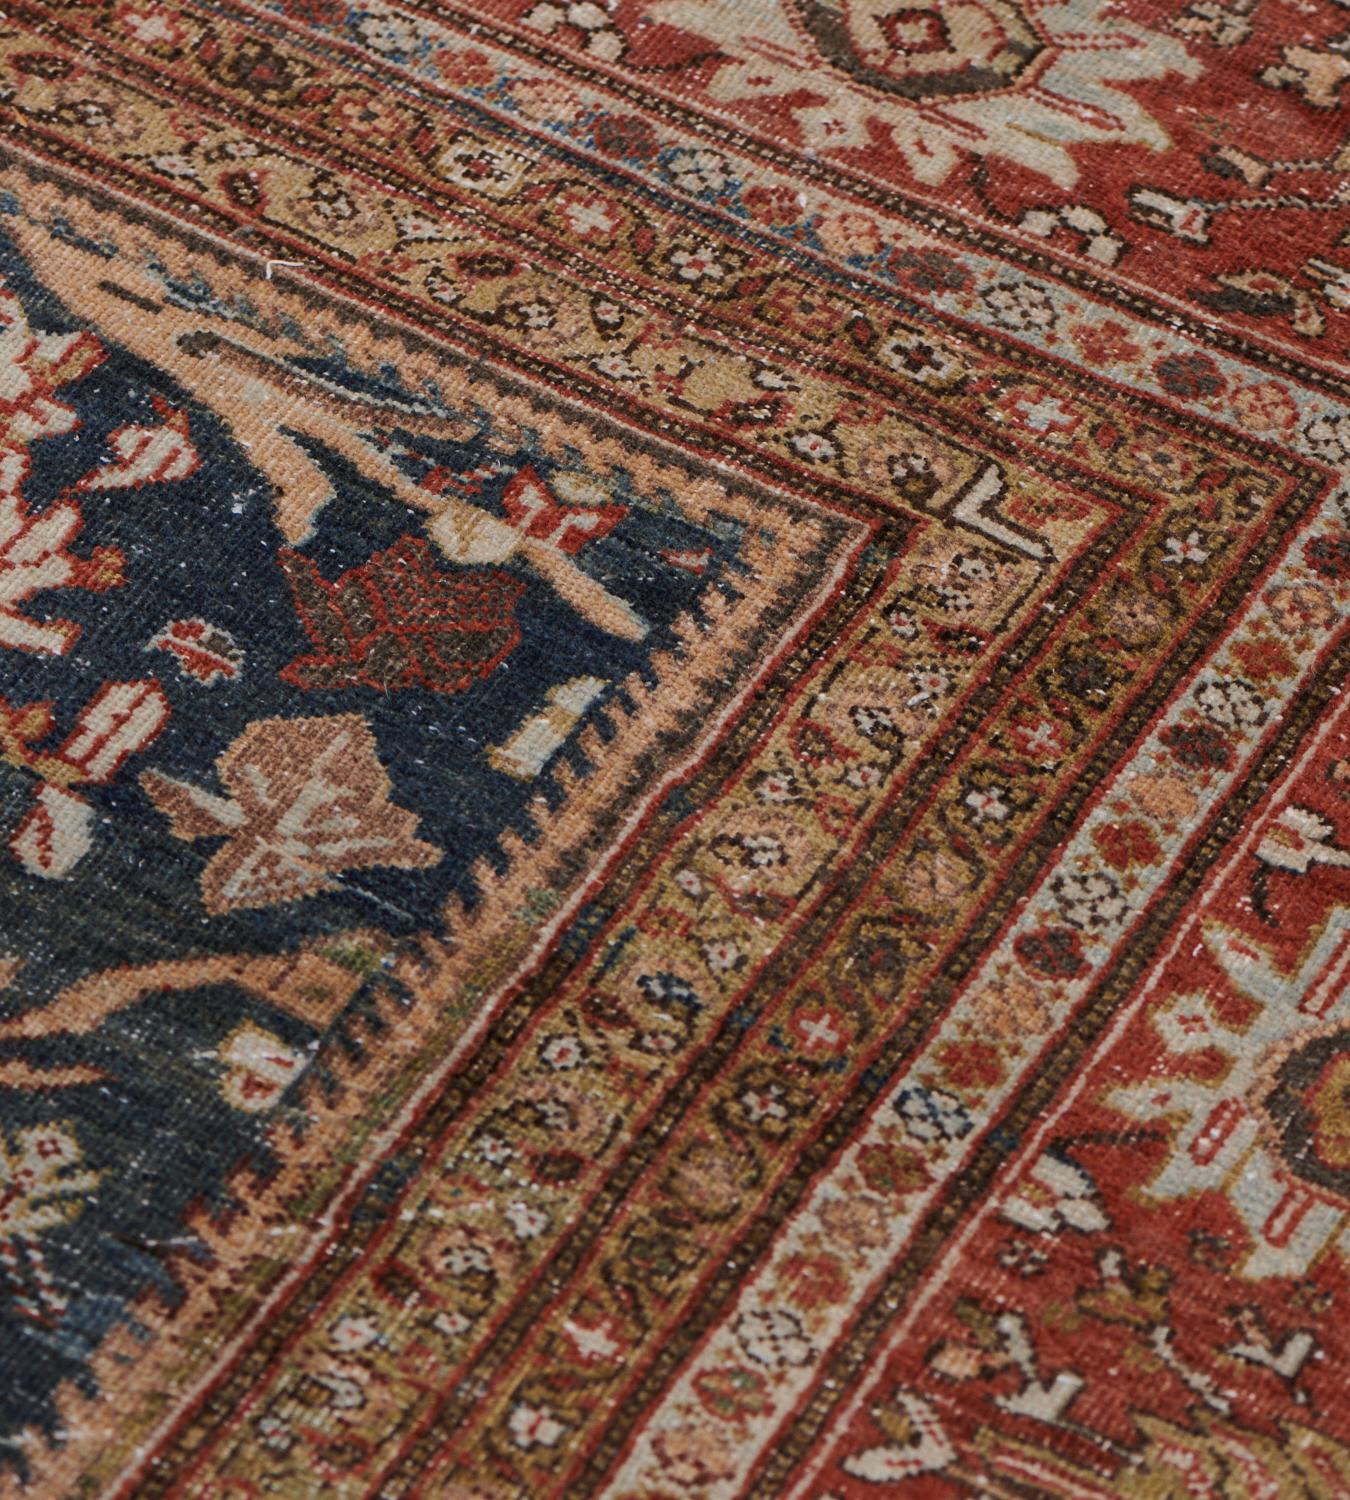 This antique, late 19th Century, Sultanabad rug has a shaded indigo-blue field with an overall design of ivory and soft apricot leafy and floral vine enclosing a floral spray surrounded by a garland of flowerheads, in brick-red border of polychrome